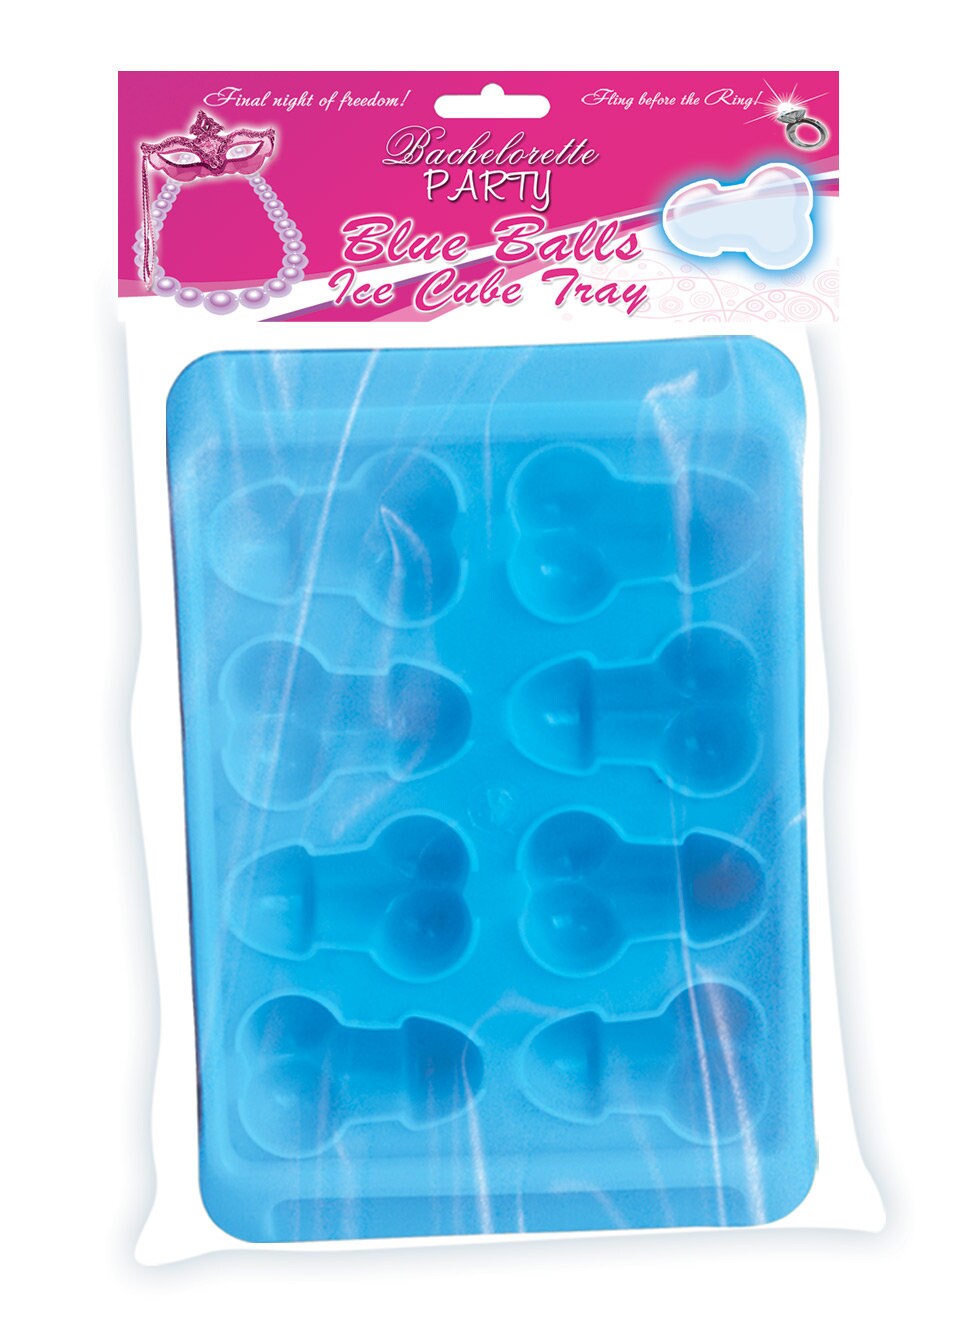 Penis Willy Shape Ice Cube Tray Pink Novelty Gag Gift Bachelorette Party 2 Pack 